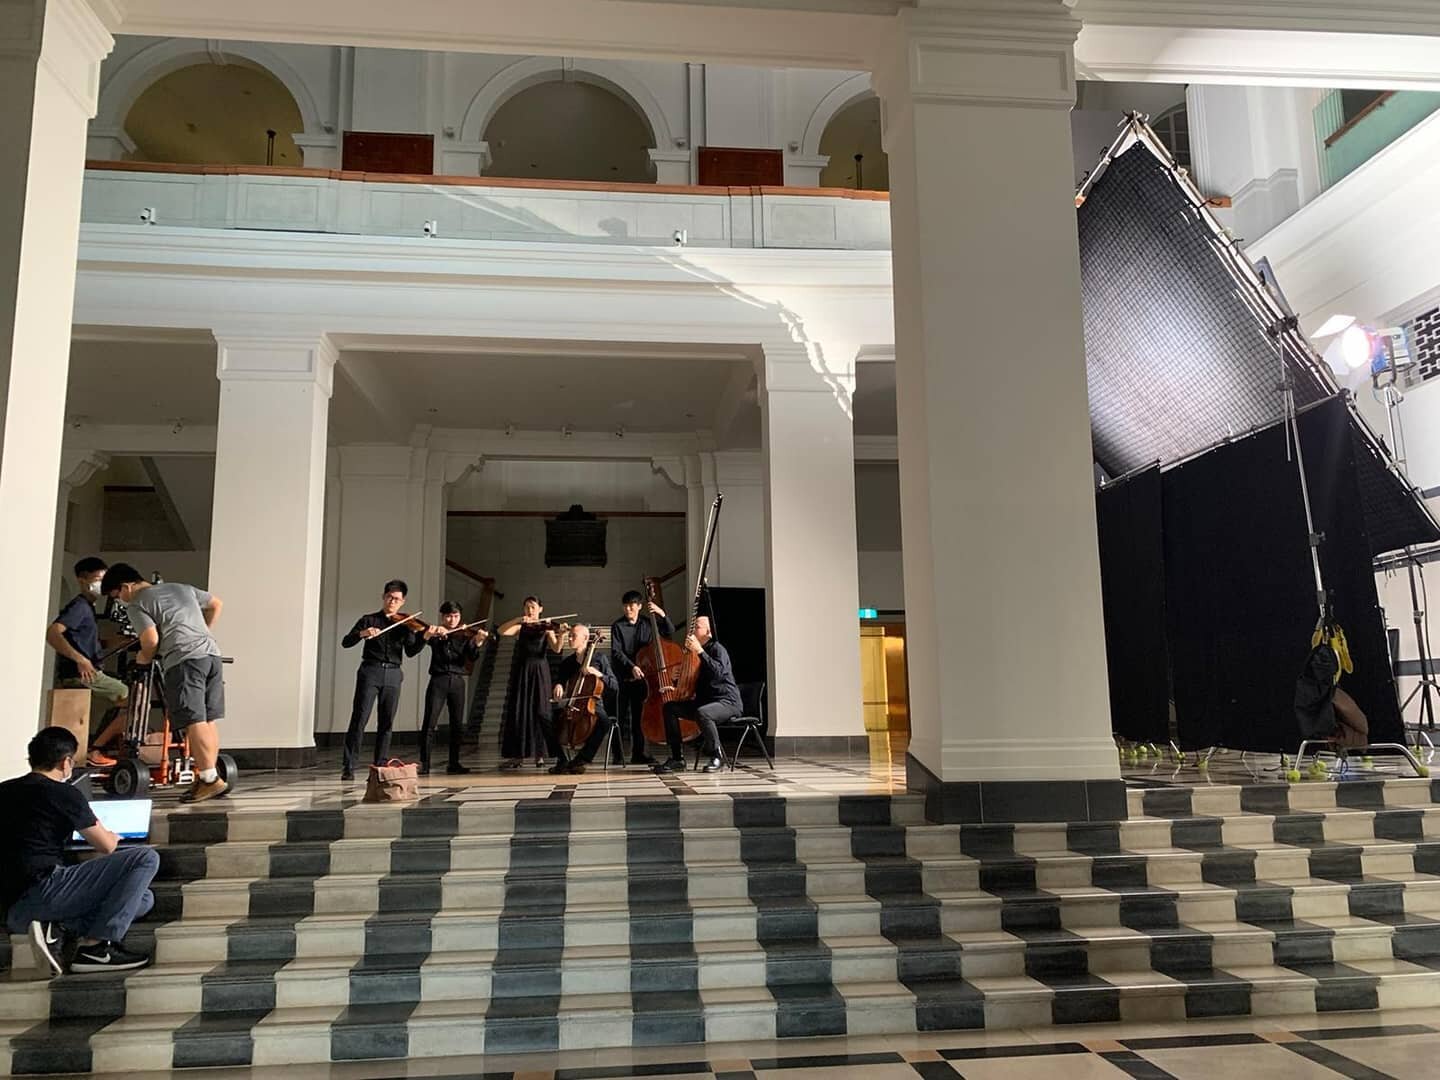 #behindthescenes of our latest MV of Vivaldi's Cum dederit..

Our shoot was 5-9am at @nationalgallerysingapore , and the crew was there since 3:45am! 😱 During those unearthly hours, we were able to catch darkness 🌃, the breaking of dawn 🌅, and eve